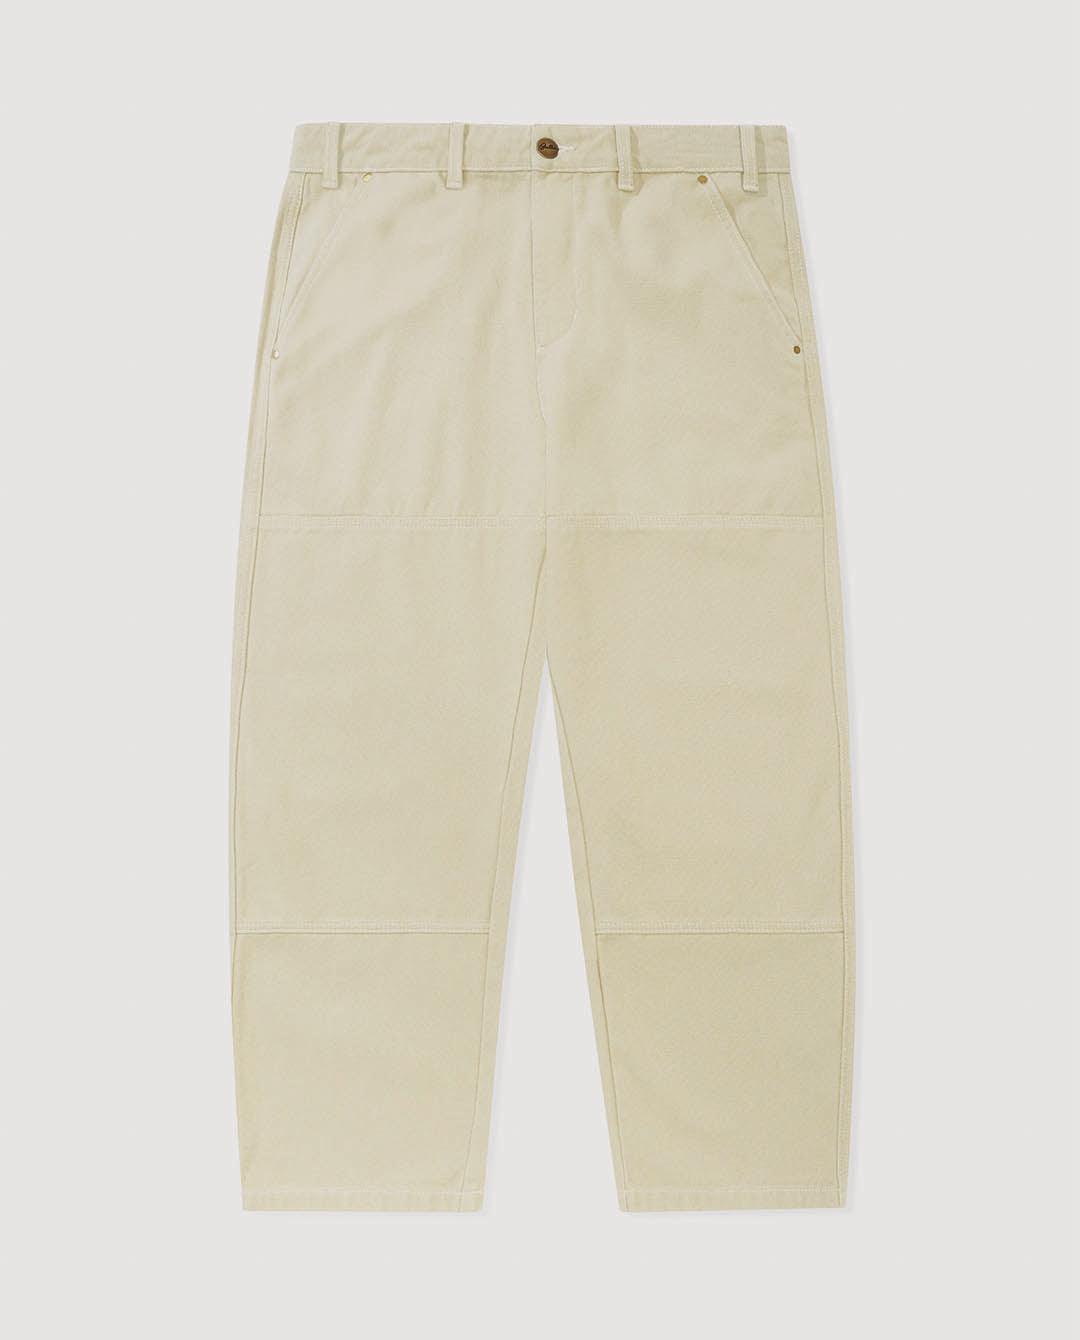 Butter Goods - Work Double Knee Pants - Washed Khaki Pants Butter Goods   